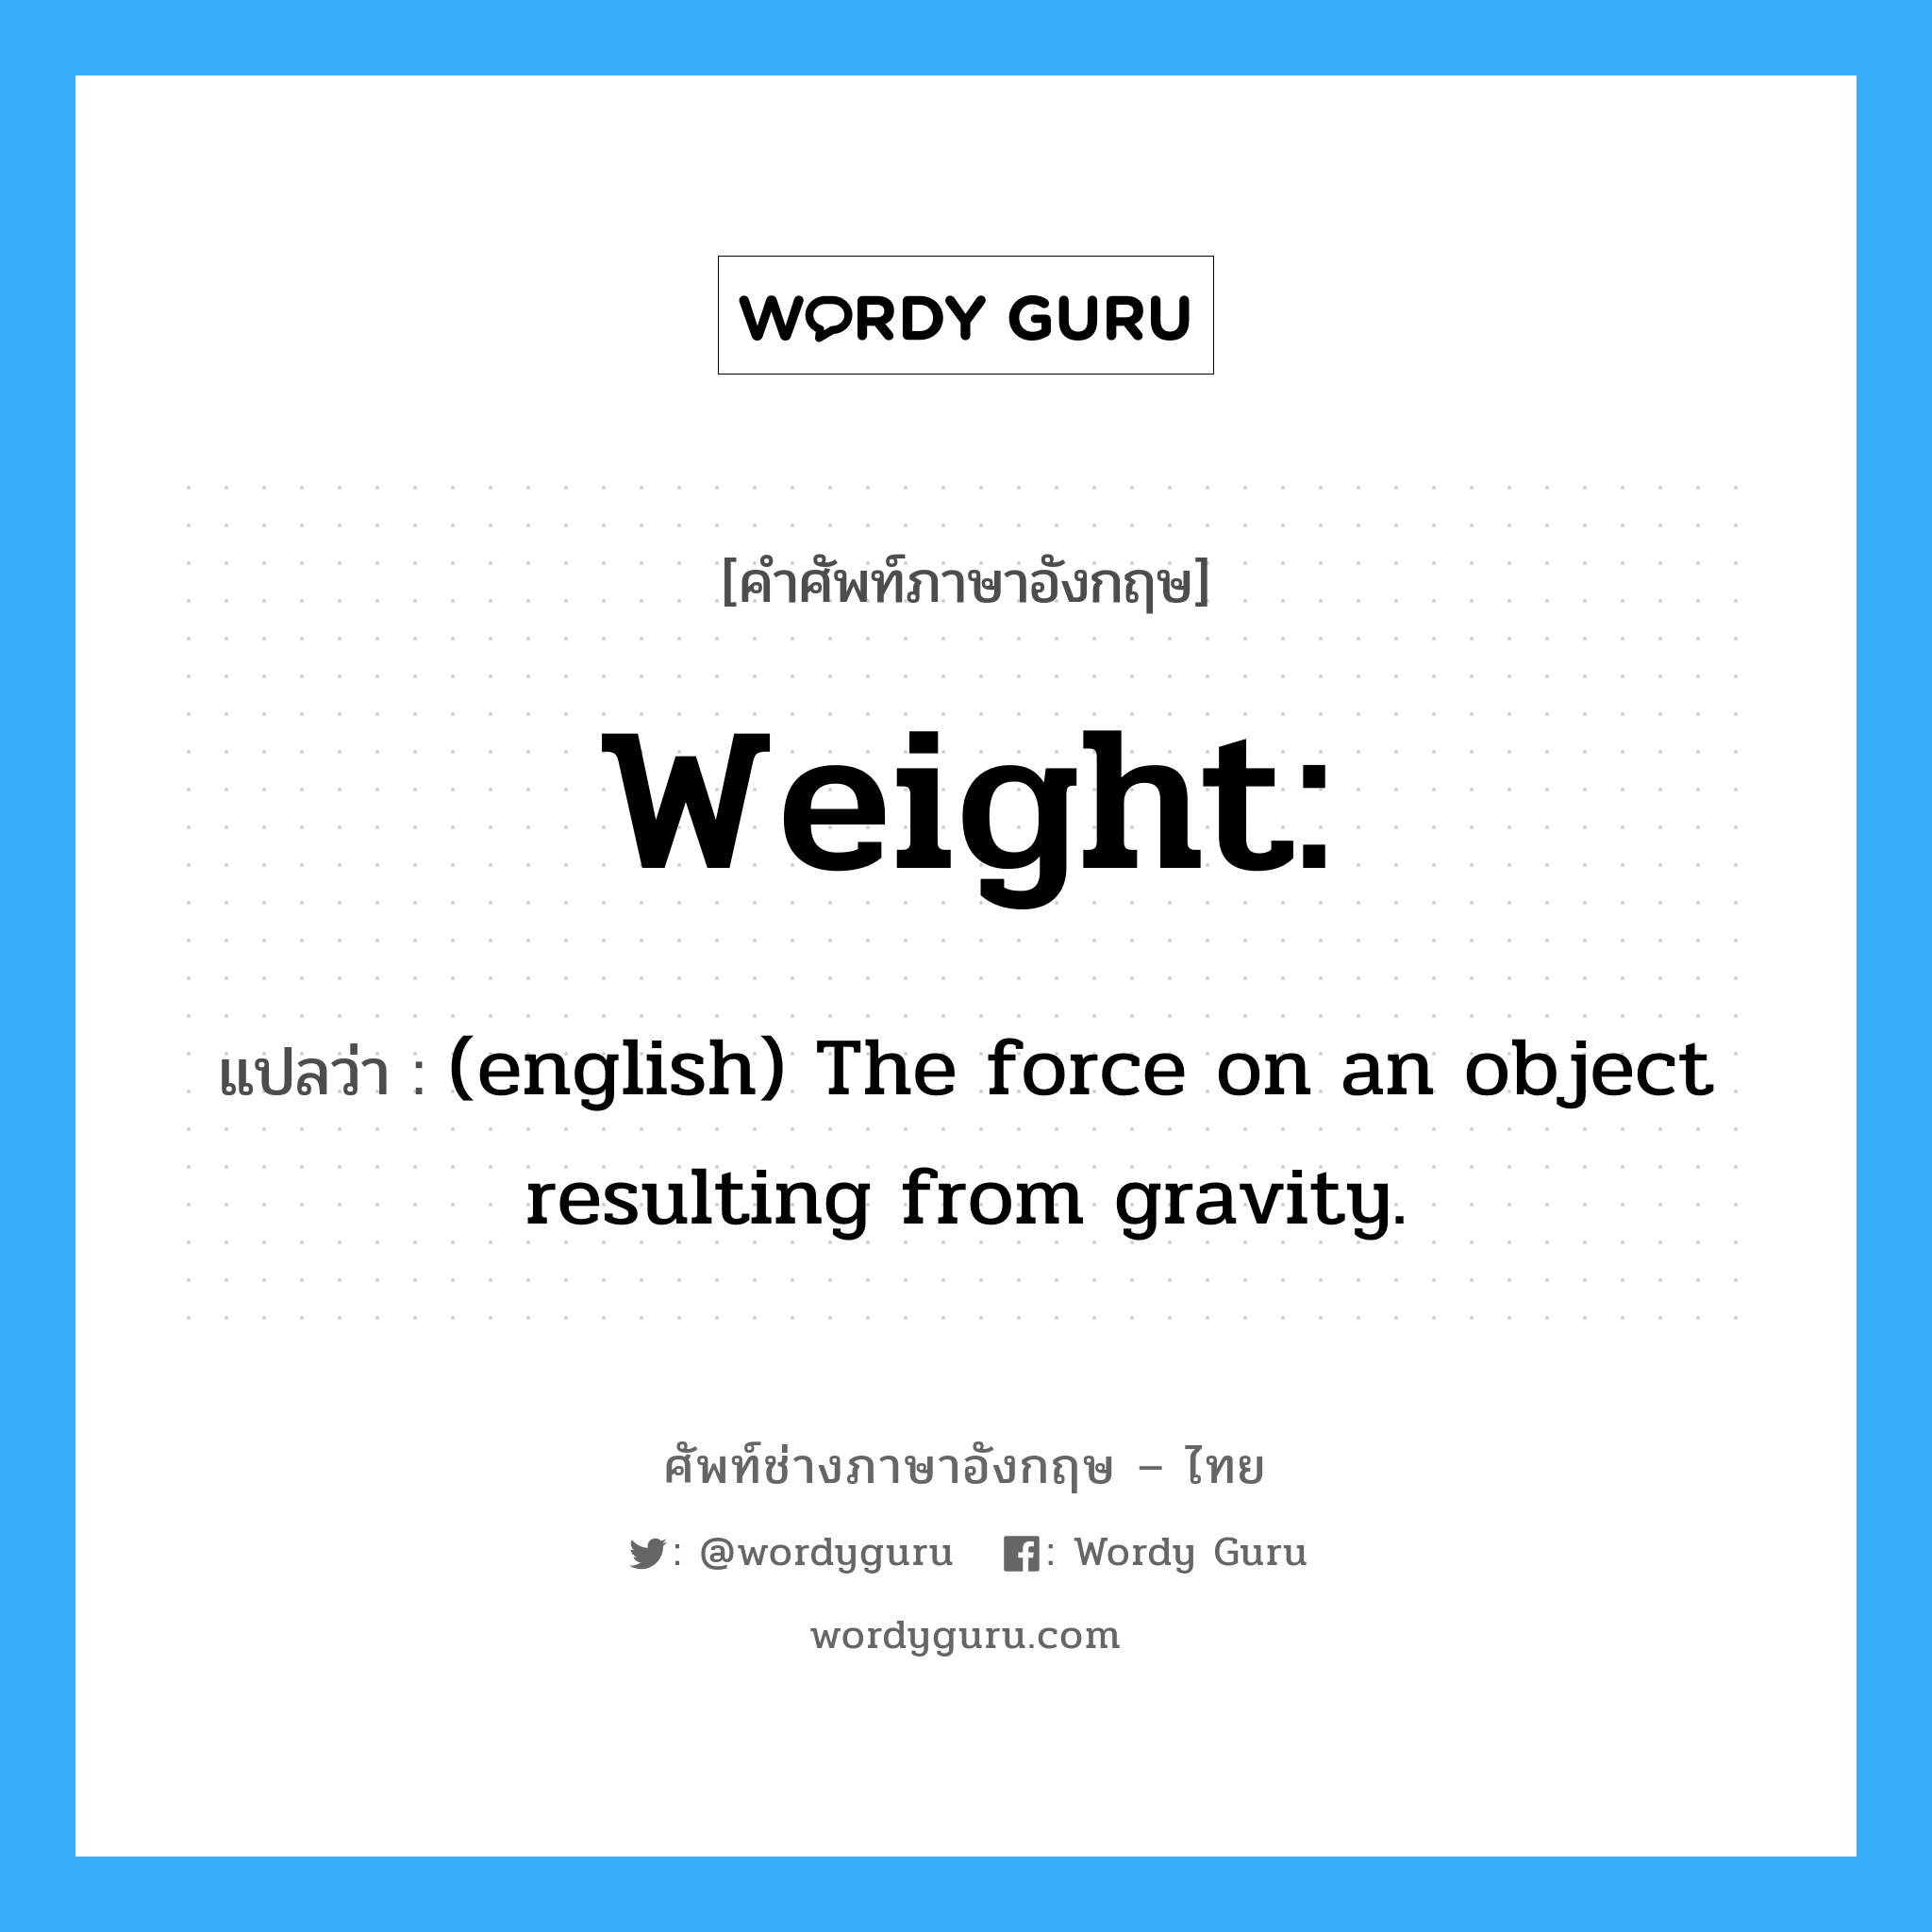 Weight: แปลว่า?, คำศัพท์ช่างภาษาอังกฤษ - ไทย Weight: คำศัพท์ภาษาอังกฤษ Weight: แปลว่า (english) The force on an object resulting from gravity.